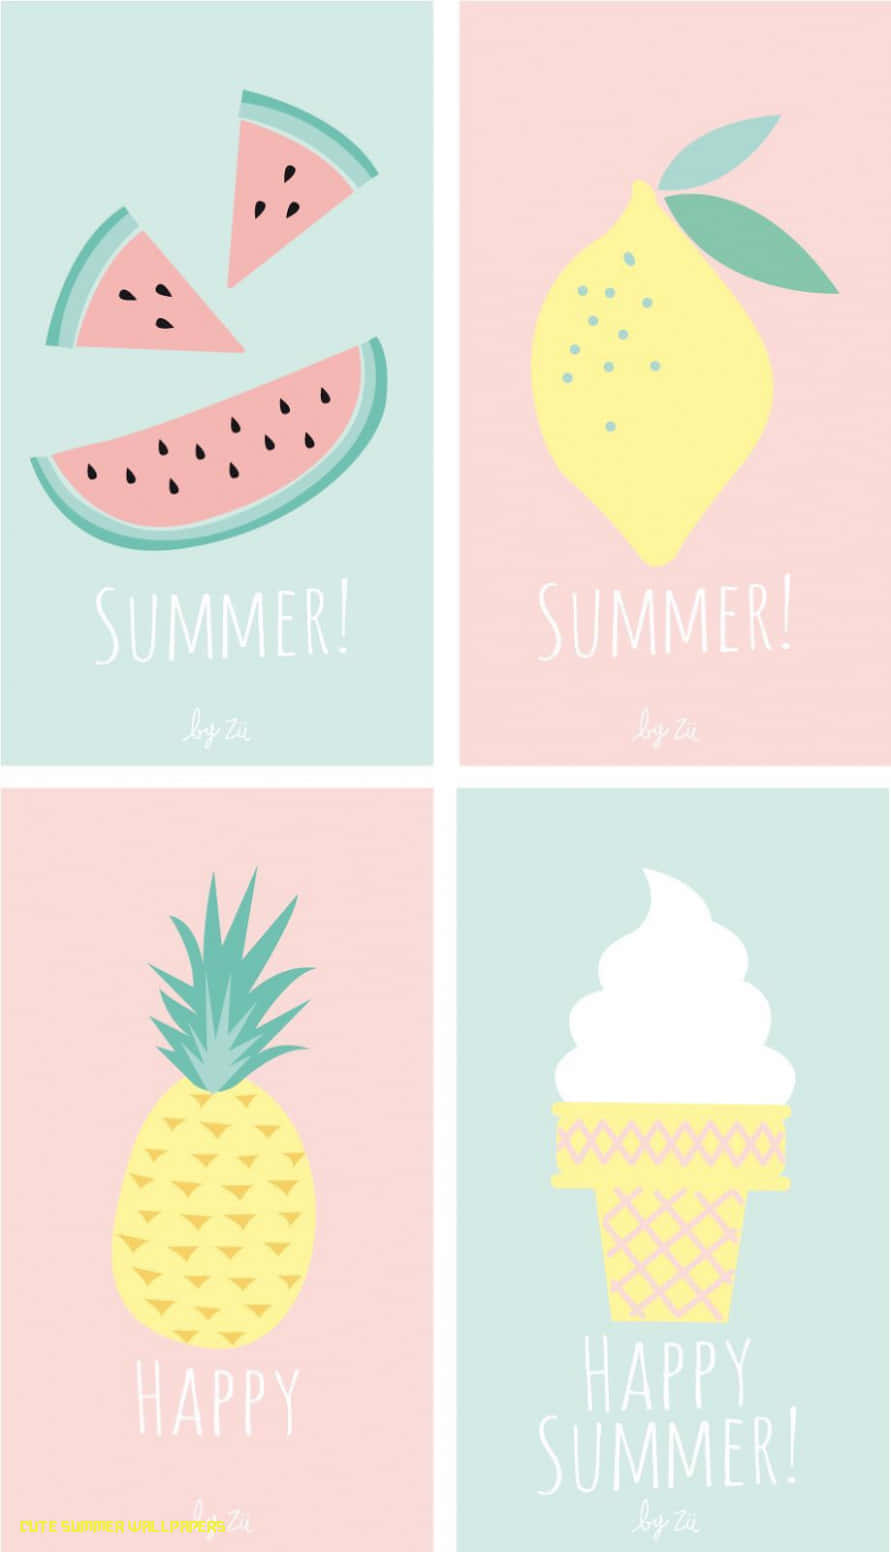 Four Summer Themed Prints With Fruit And Ice Cream Wallpaper